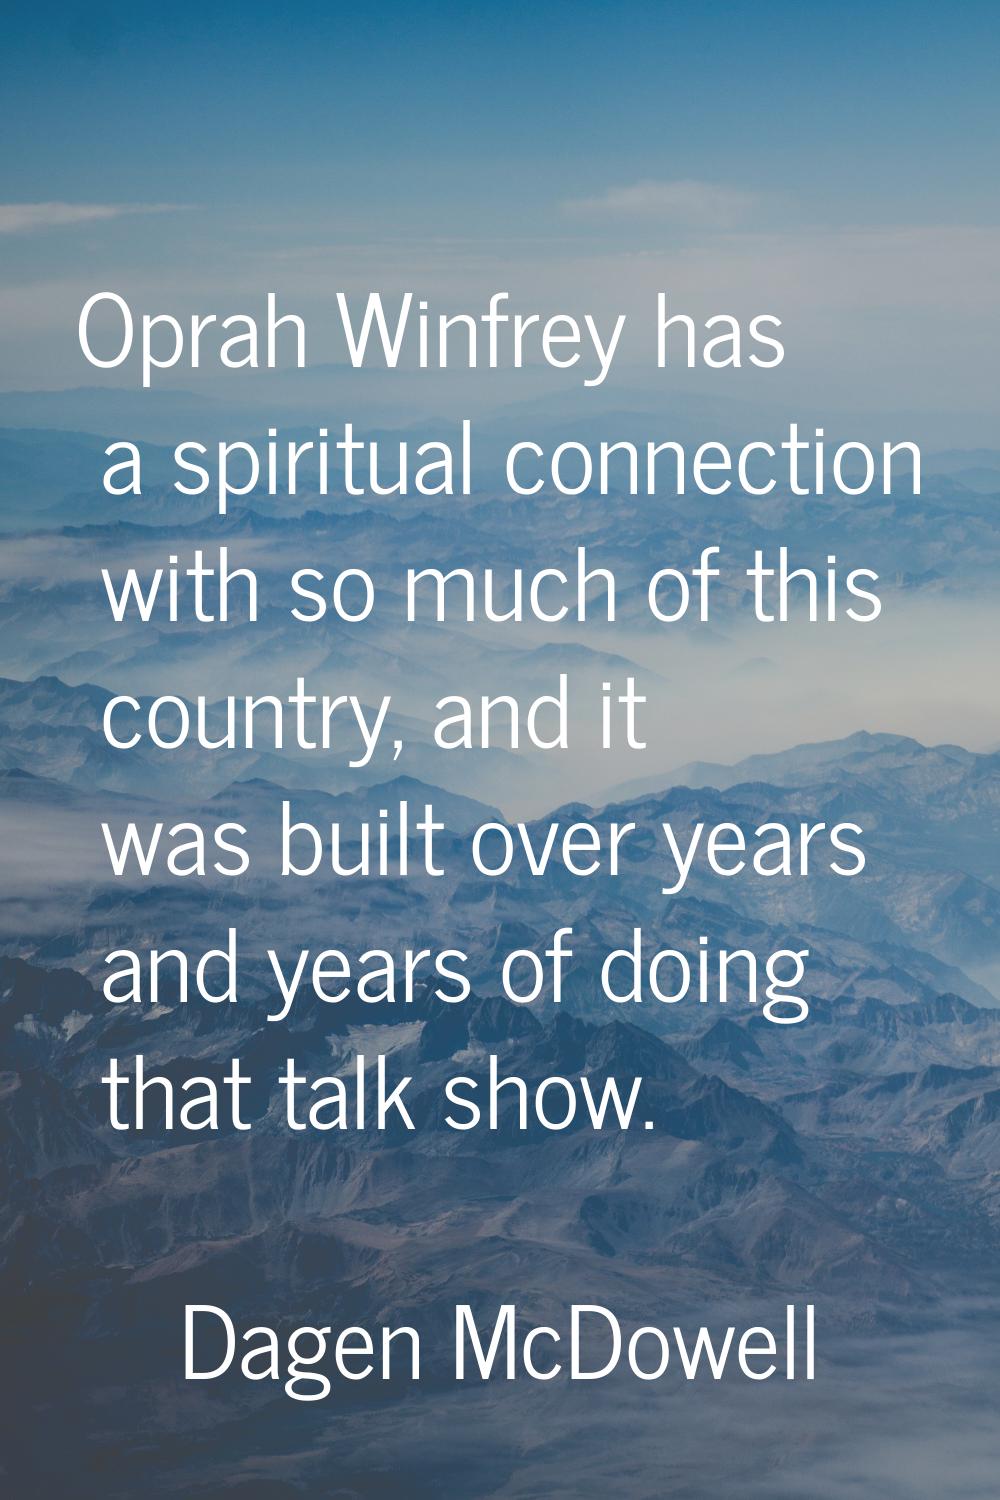 Oprah Winfrey has a spiritual connection with so much of this country, and it was built over years 